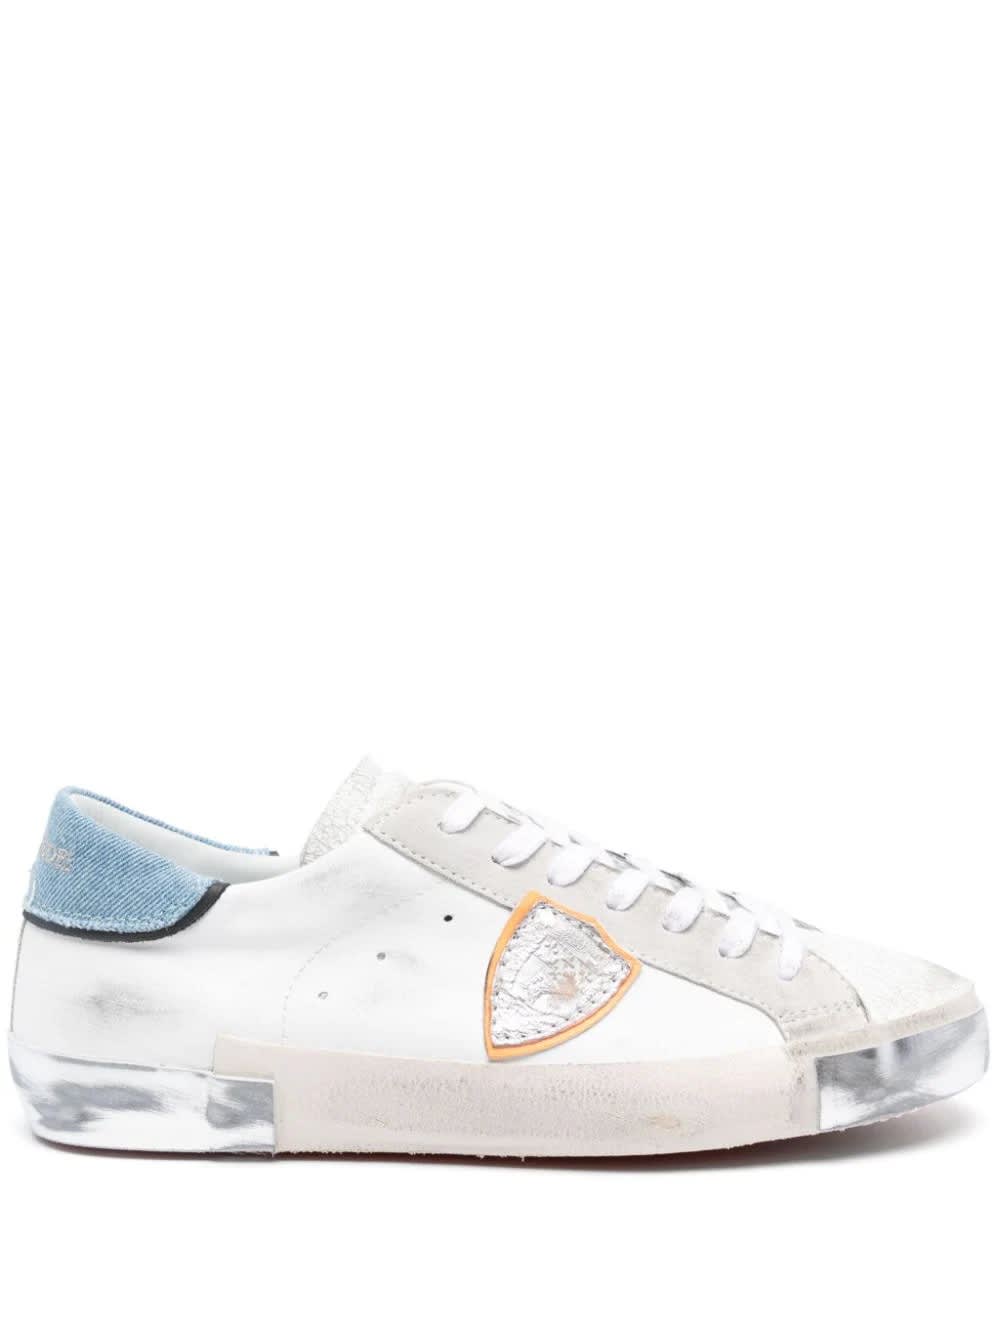 Shop Philippe Model Prsx Low Sneakers - White And Light Blue